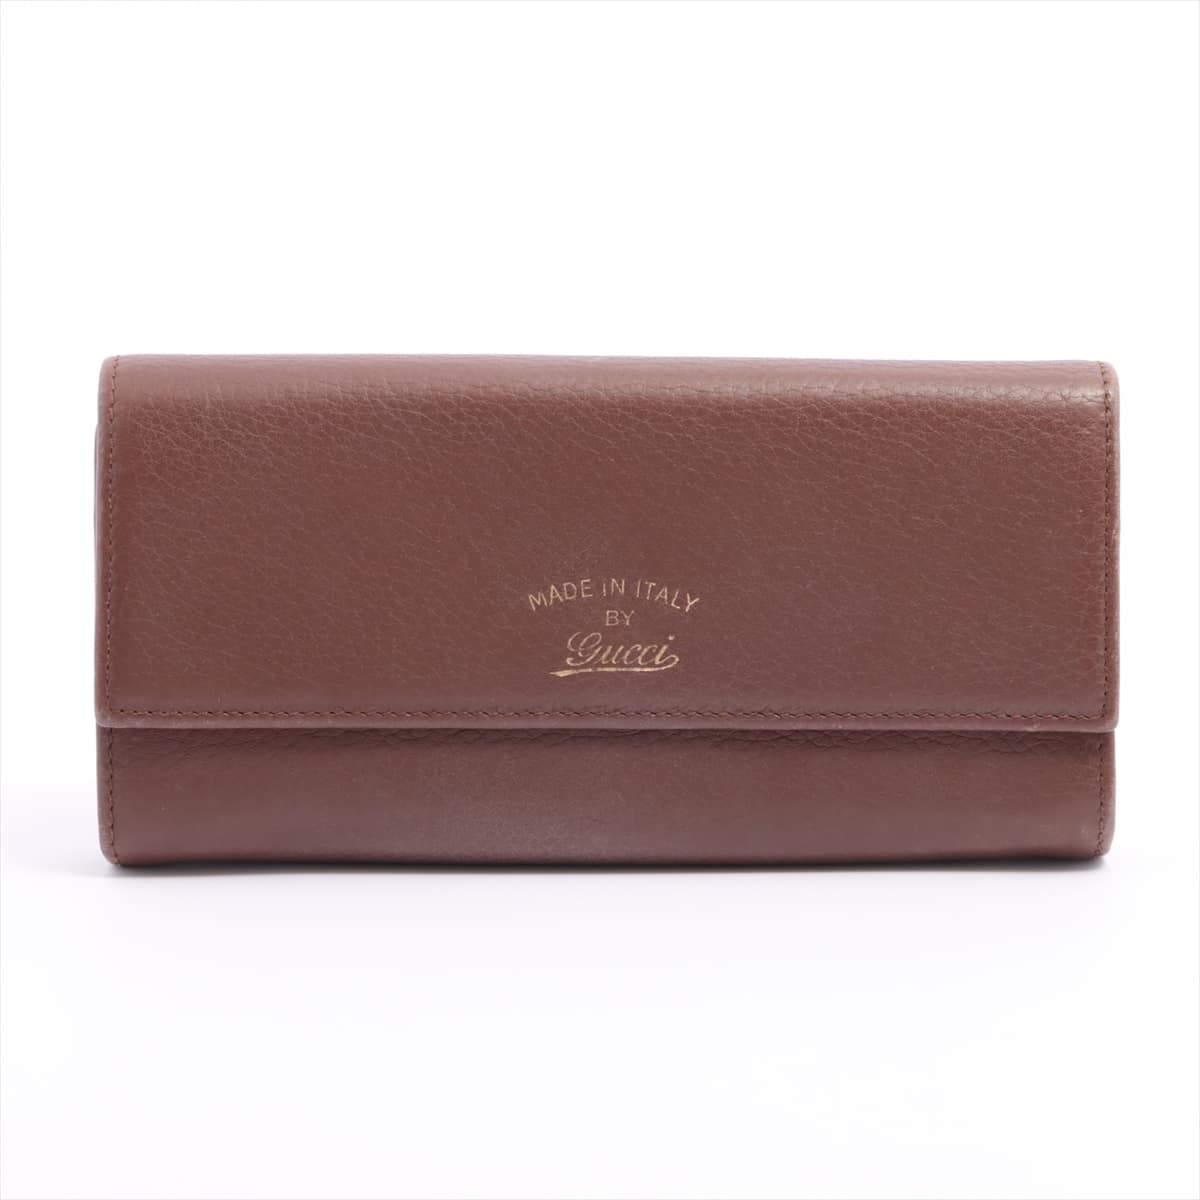 Gucci Swing 376186 Leather Wallet Brown